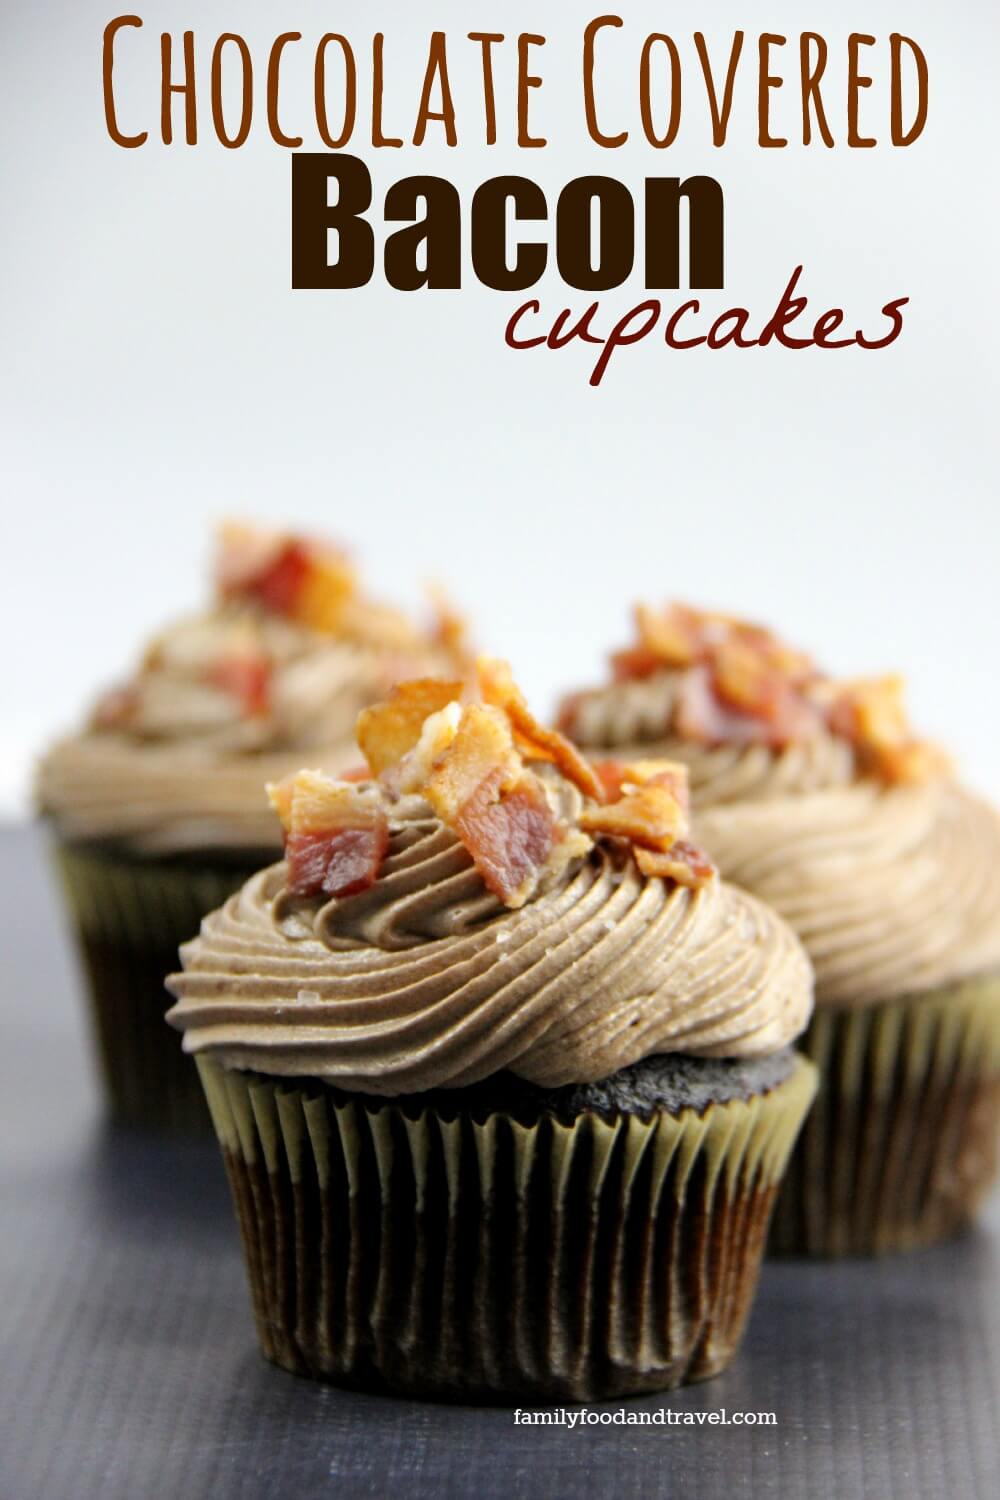 Chocolate Covered Bacon Cupcakes from Family Food and Travel